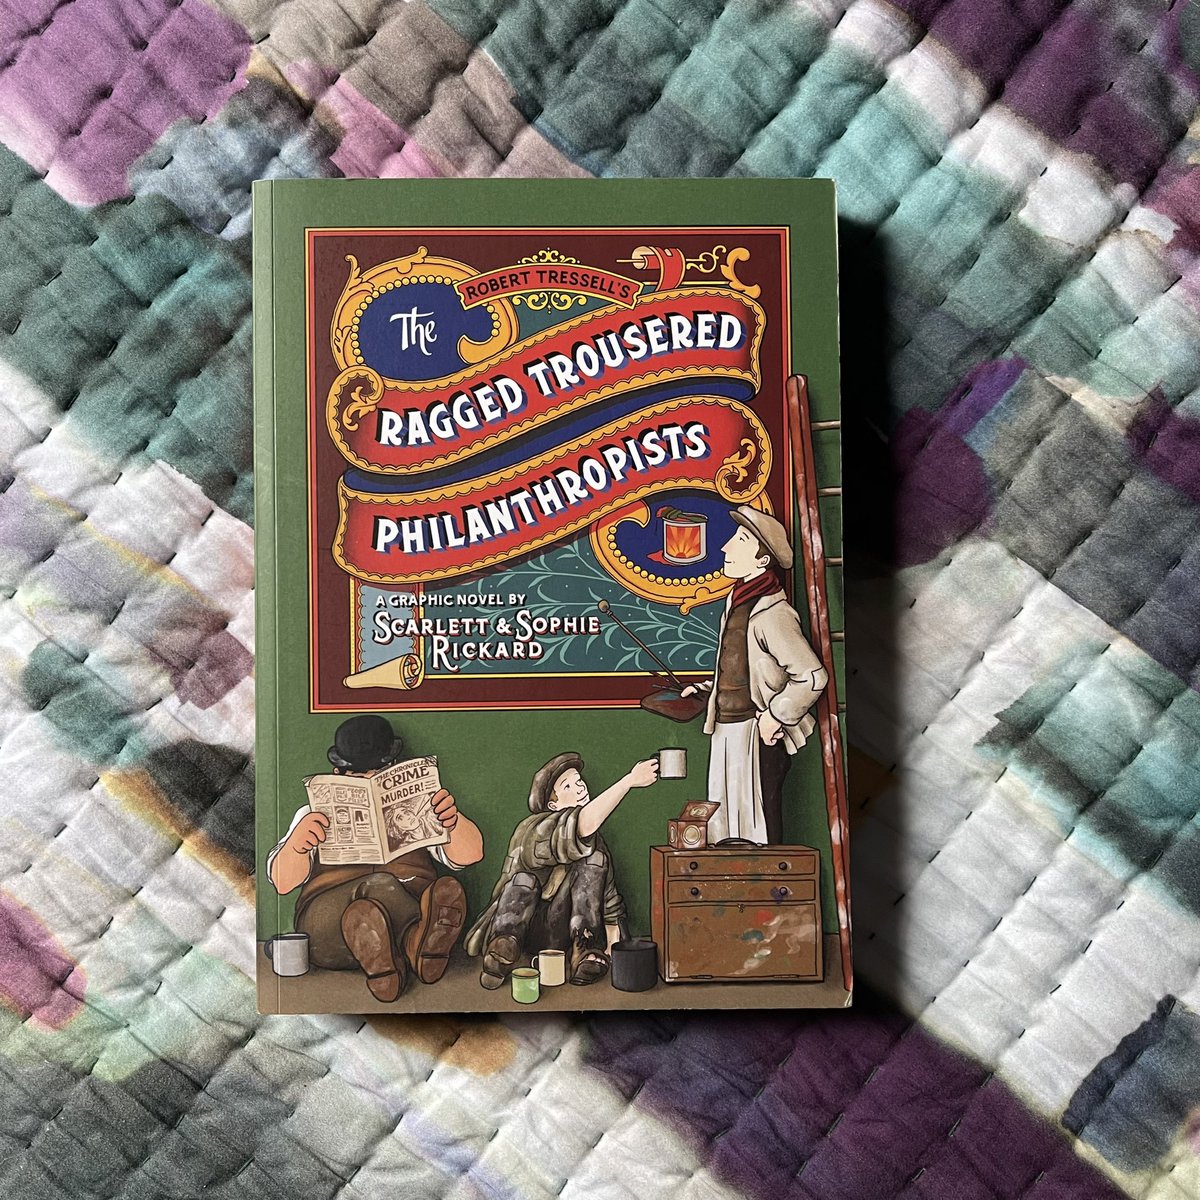 The graphic novel of The Ragged Trousered Philanthropists makes Robert Tressell’s forceful points easy to follow. It’s a faithful adaptation that makes a classic novel accessible and engaging - have you seen it?